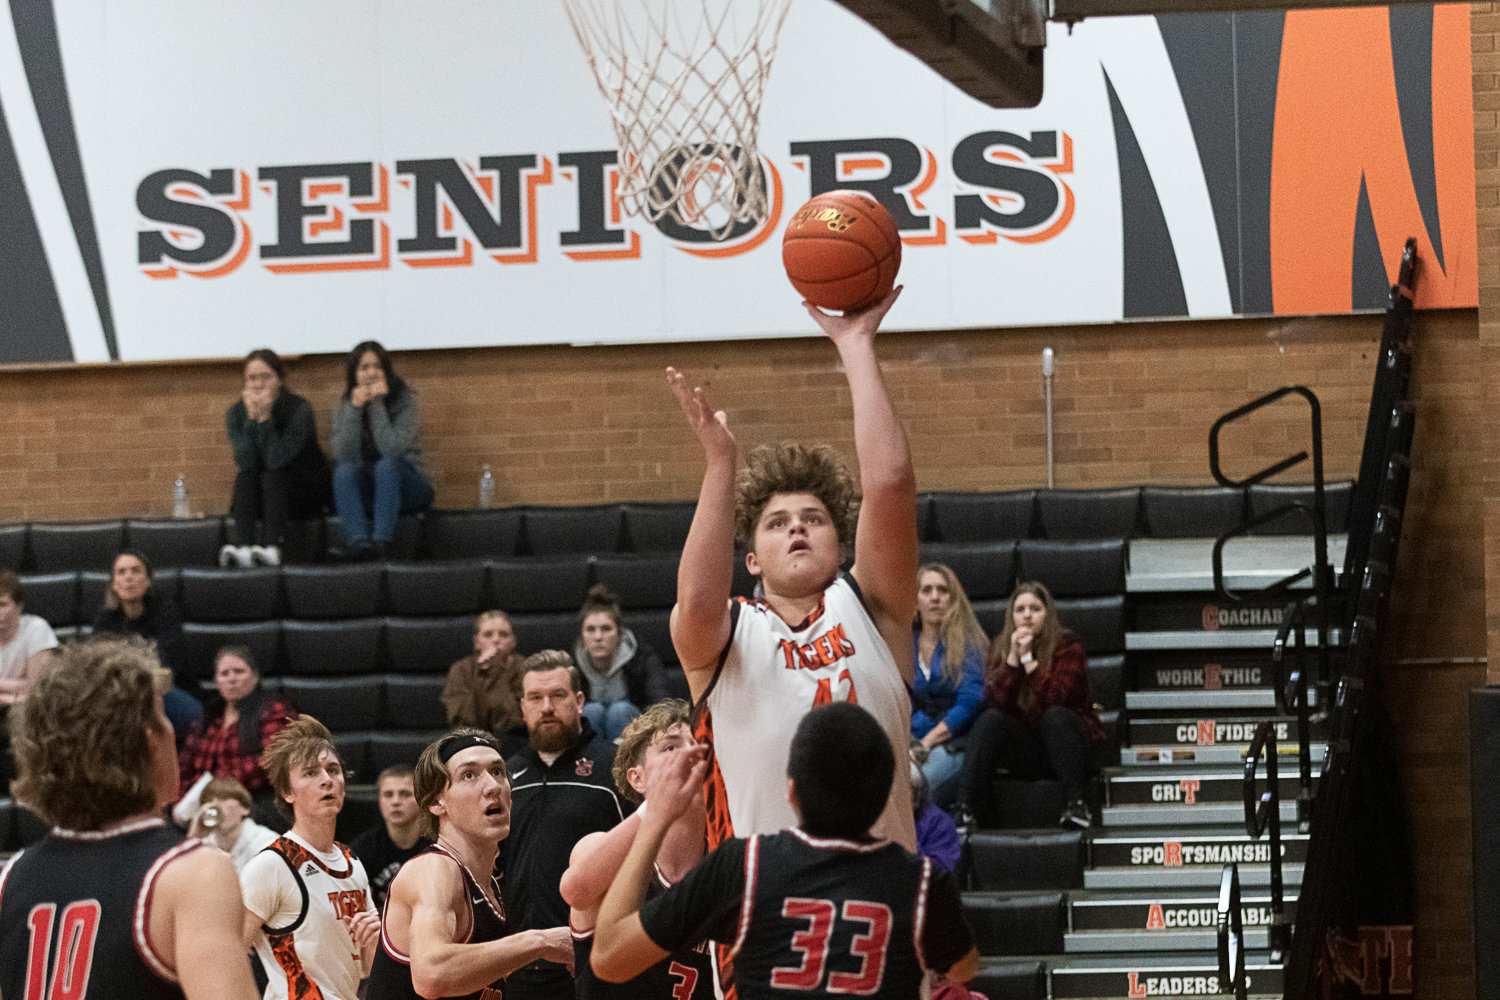 Sophomore David Daarud takes a shot in the post during Centralia's loss to Shelton on Feb. 2.